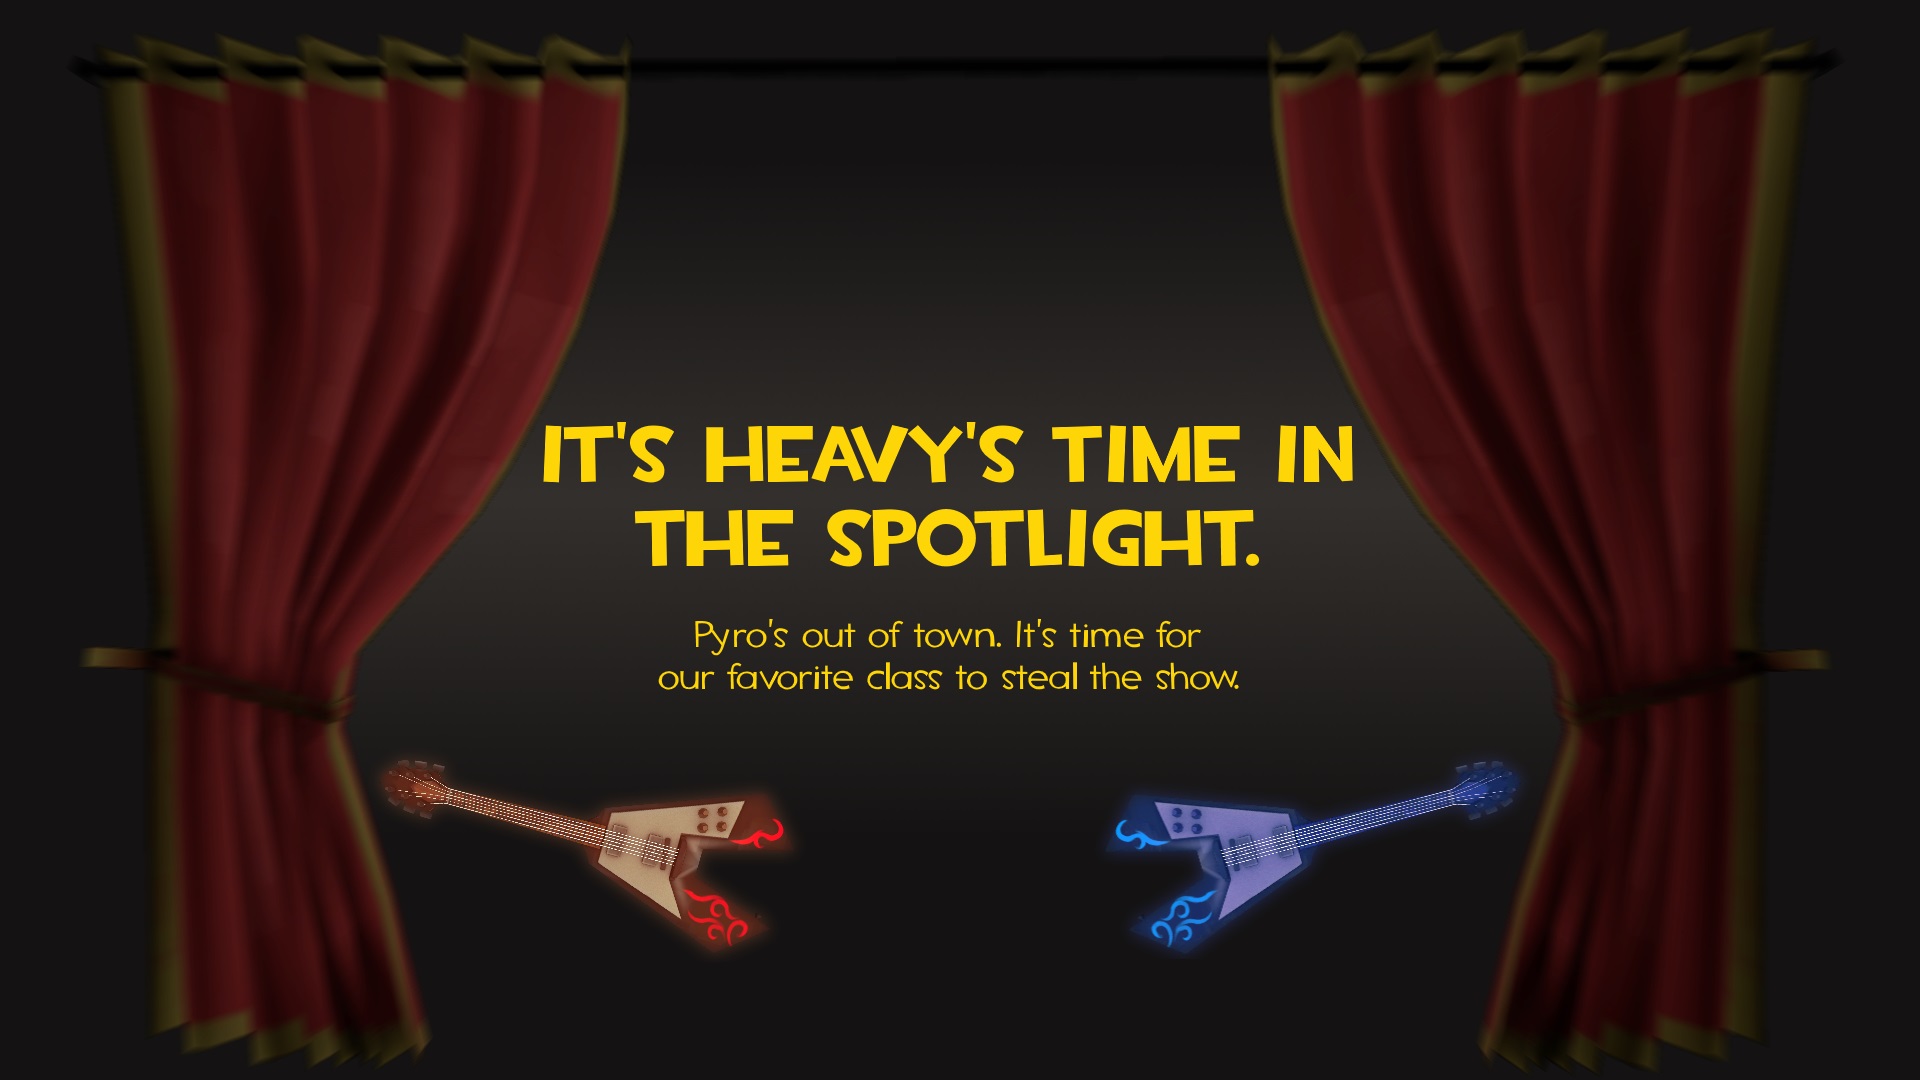 It's Heavy's time in the spotlight. Pyro's out of town. It's time for our favorite class to steal the show. [Two guitars, one red and one blue, floating behind a stage curtain.]